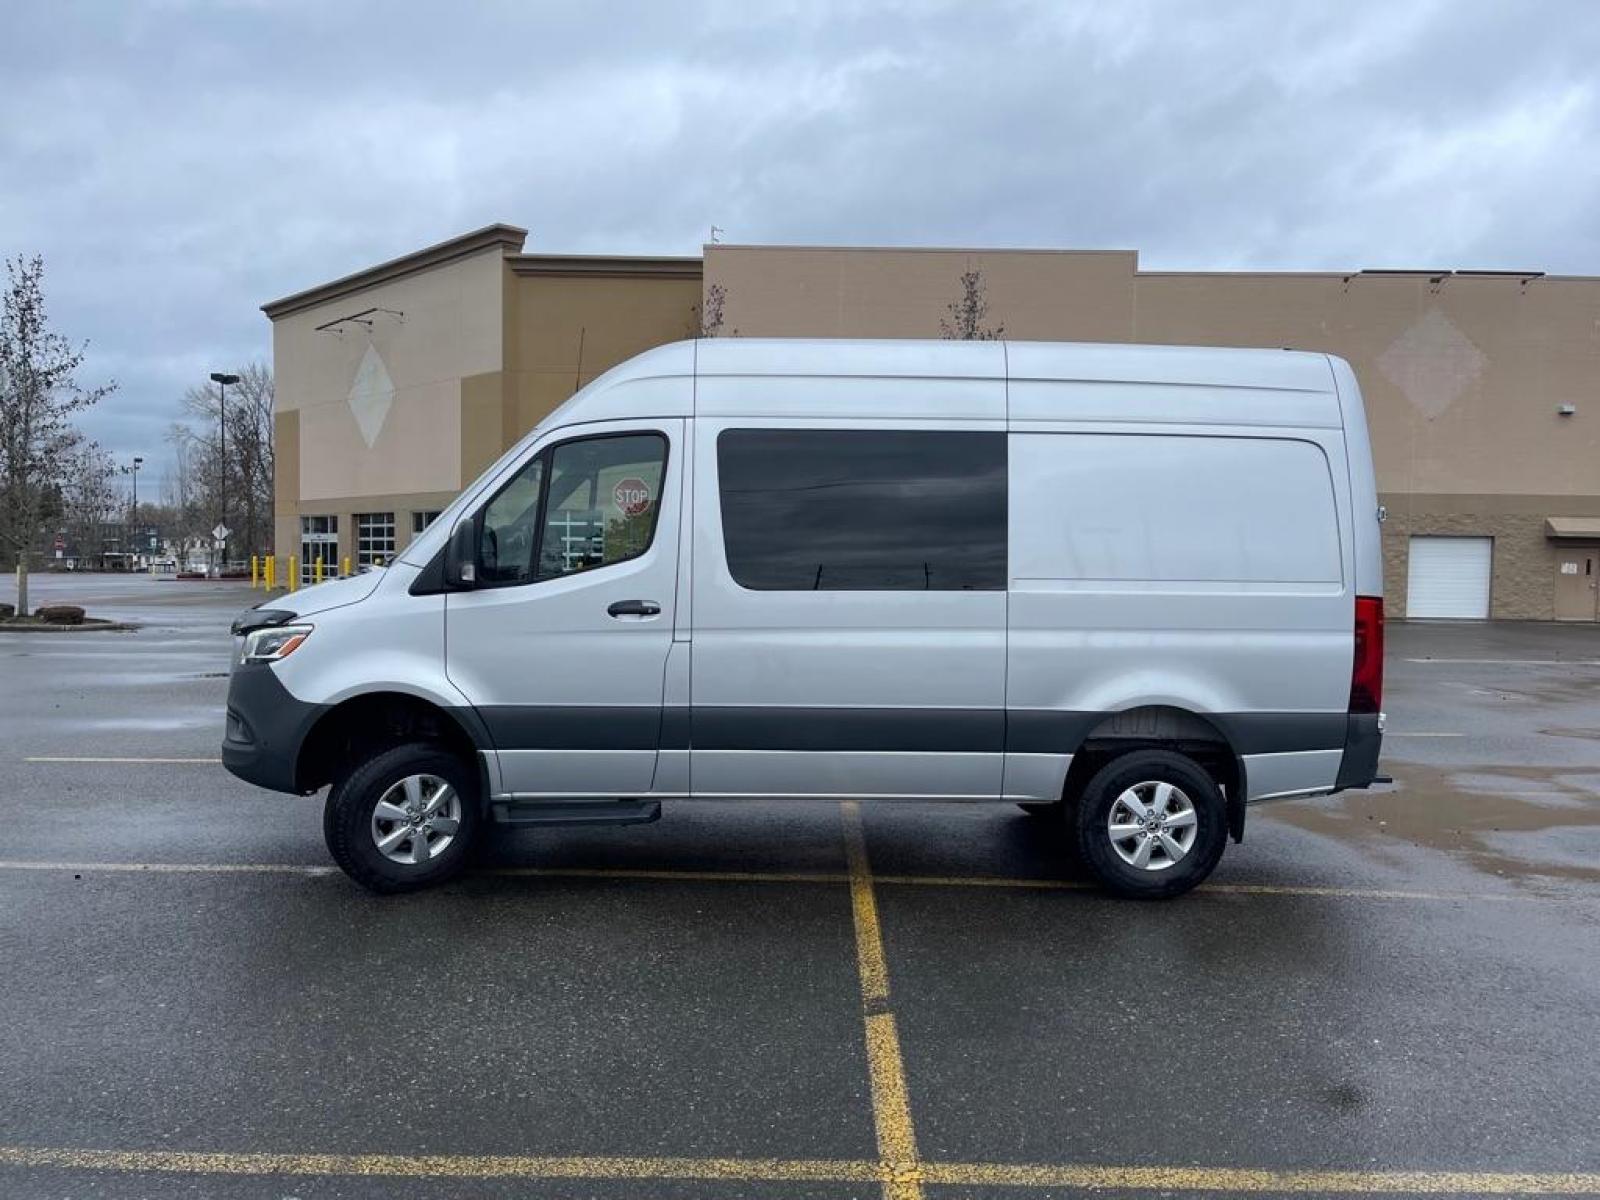 2021 IRIDIUM SILVER METALLIC /GRAY MERCEDES-BENZ SPRINTER CREW 2500 HIGH ROOF V6 144''WB, 4WD (W1W4EBVY9MT) with an 3.0L engine, Automatic transmission, located at 1505 S 356th St., Federal Way, WA, 98003, 47.282051, -122.314781 - THIS IS A HIGH ROOF MODEL!!!!!!! Standing height is 6'3'' inside. One Owner-CUSTOM BUILT FOR ONLY $89,999! You will not find a 4x4 TURBODIESEL V6, with a HIGH ROOF model like this with TOW and DRIVER ASSIST PACKAGES. Customization includes: Parking Package with 360 SURROUND-VIEW CAMER - Photo #4